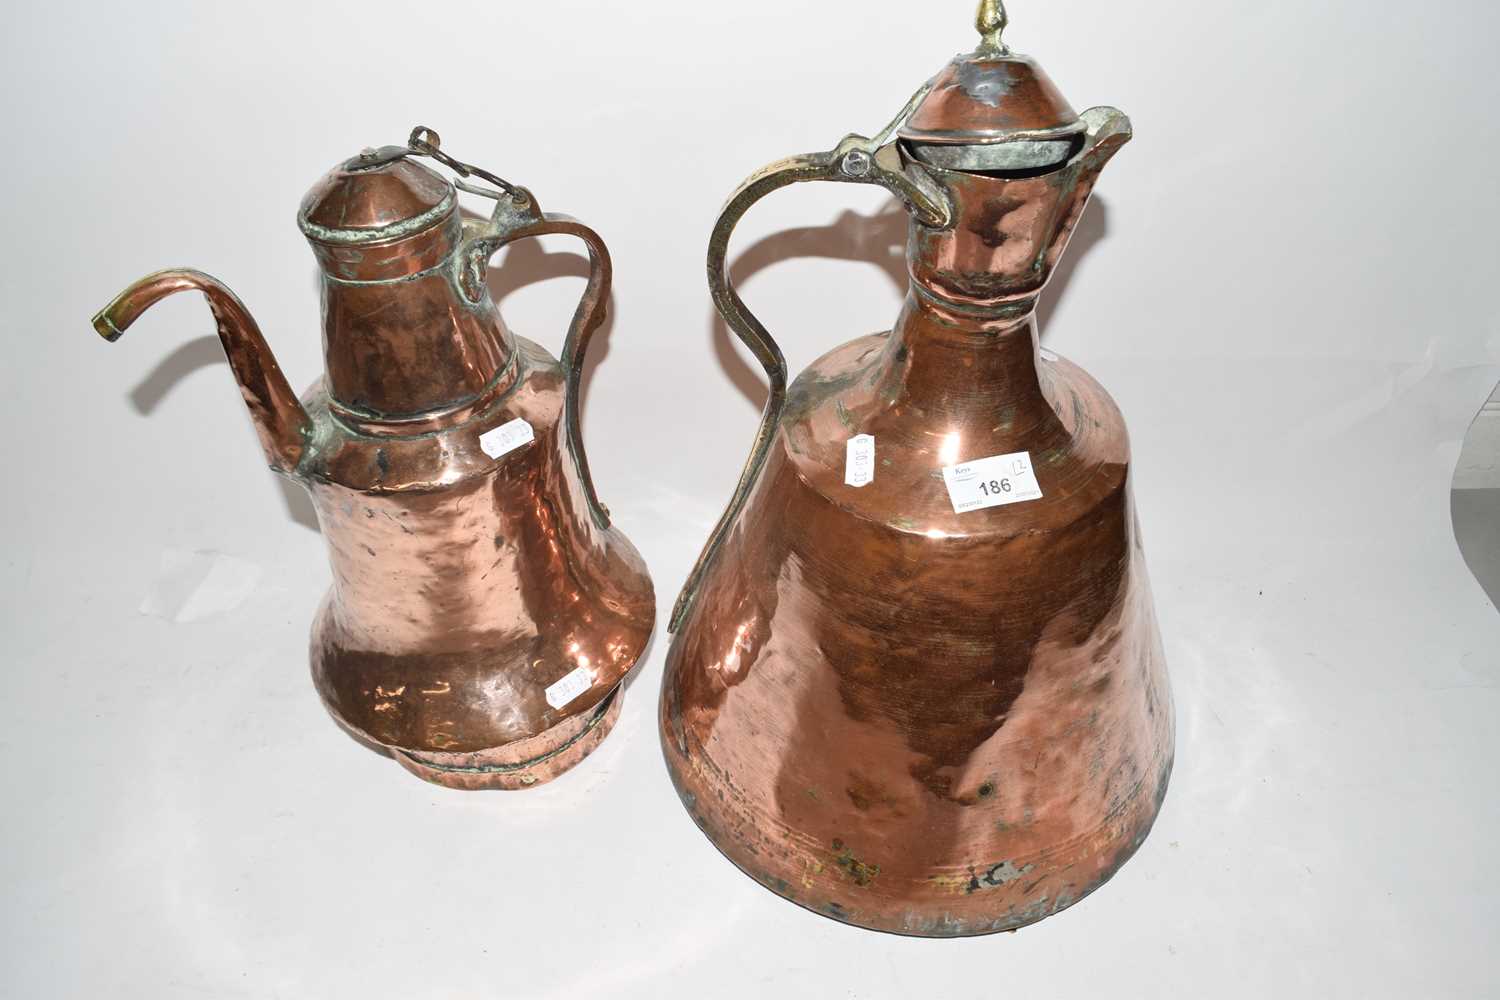 Two Middle Eastern copper jugs or kettles